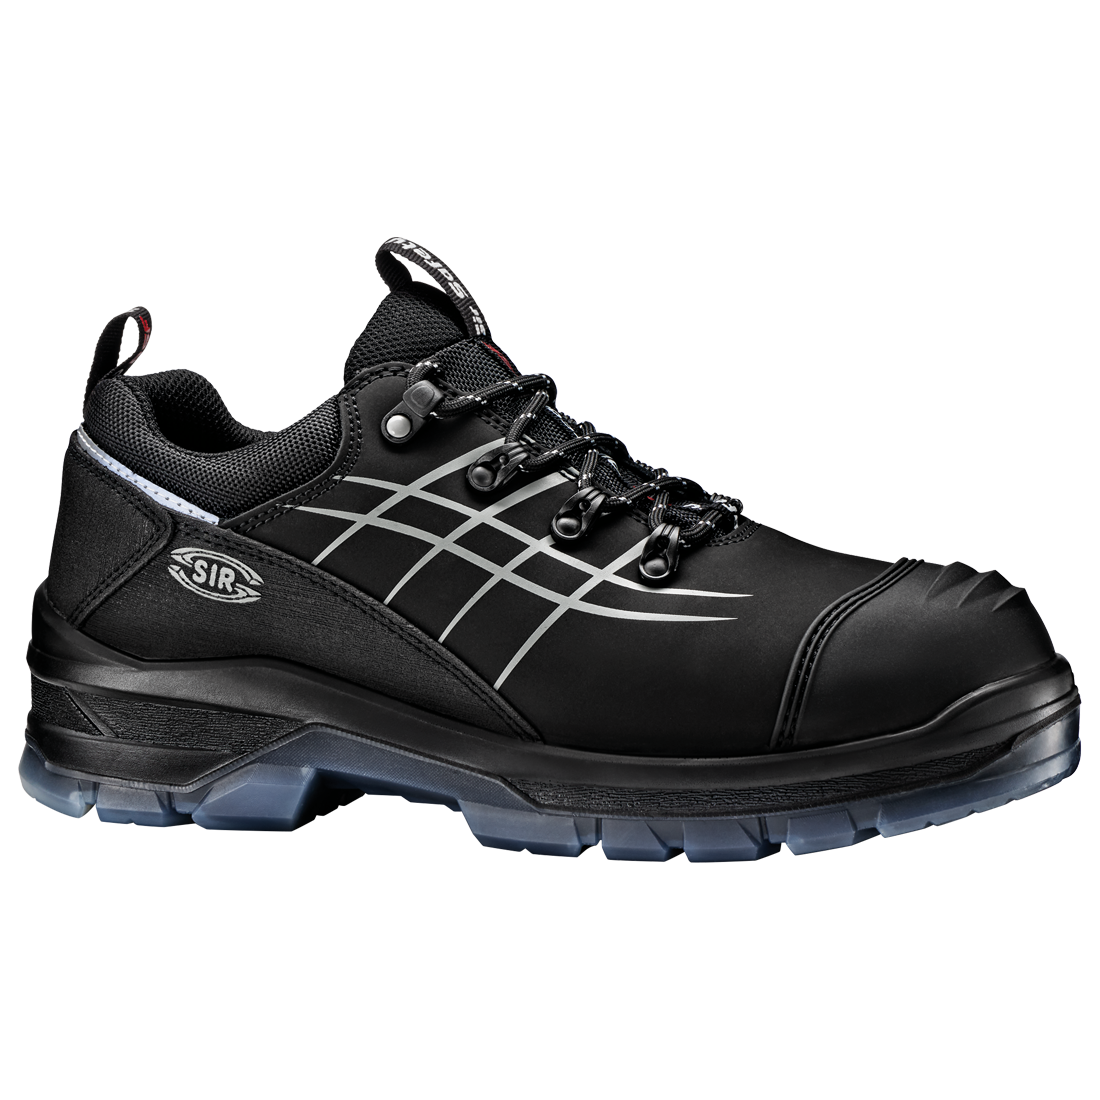 NEW OVERCAP BSF REX | Safety Sir System SHOE